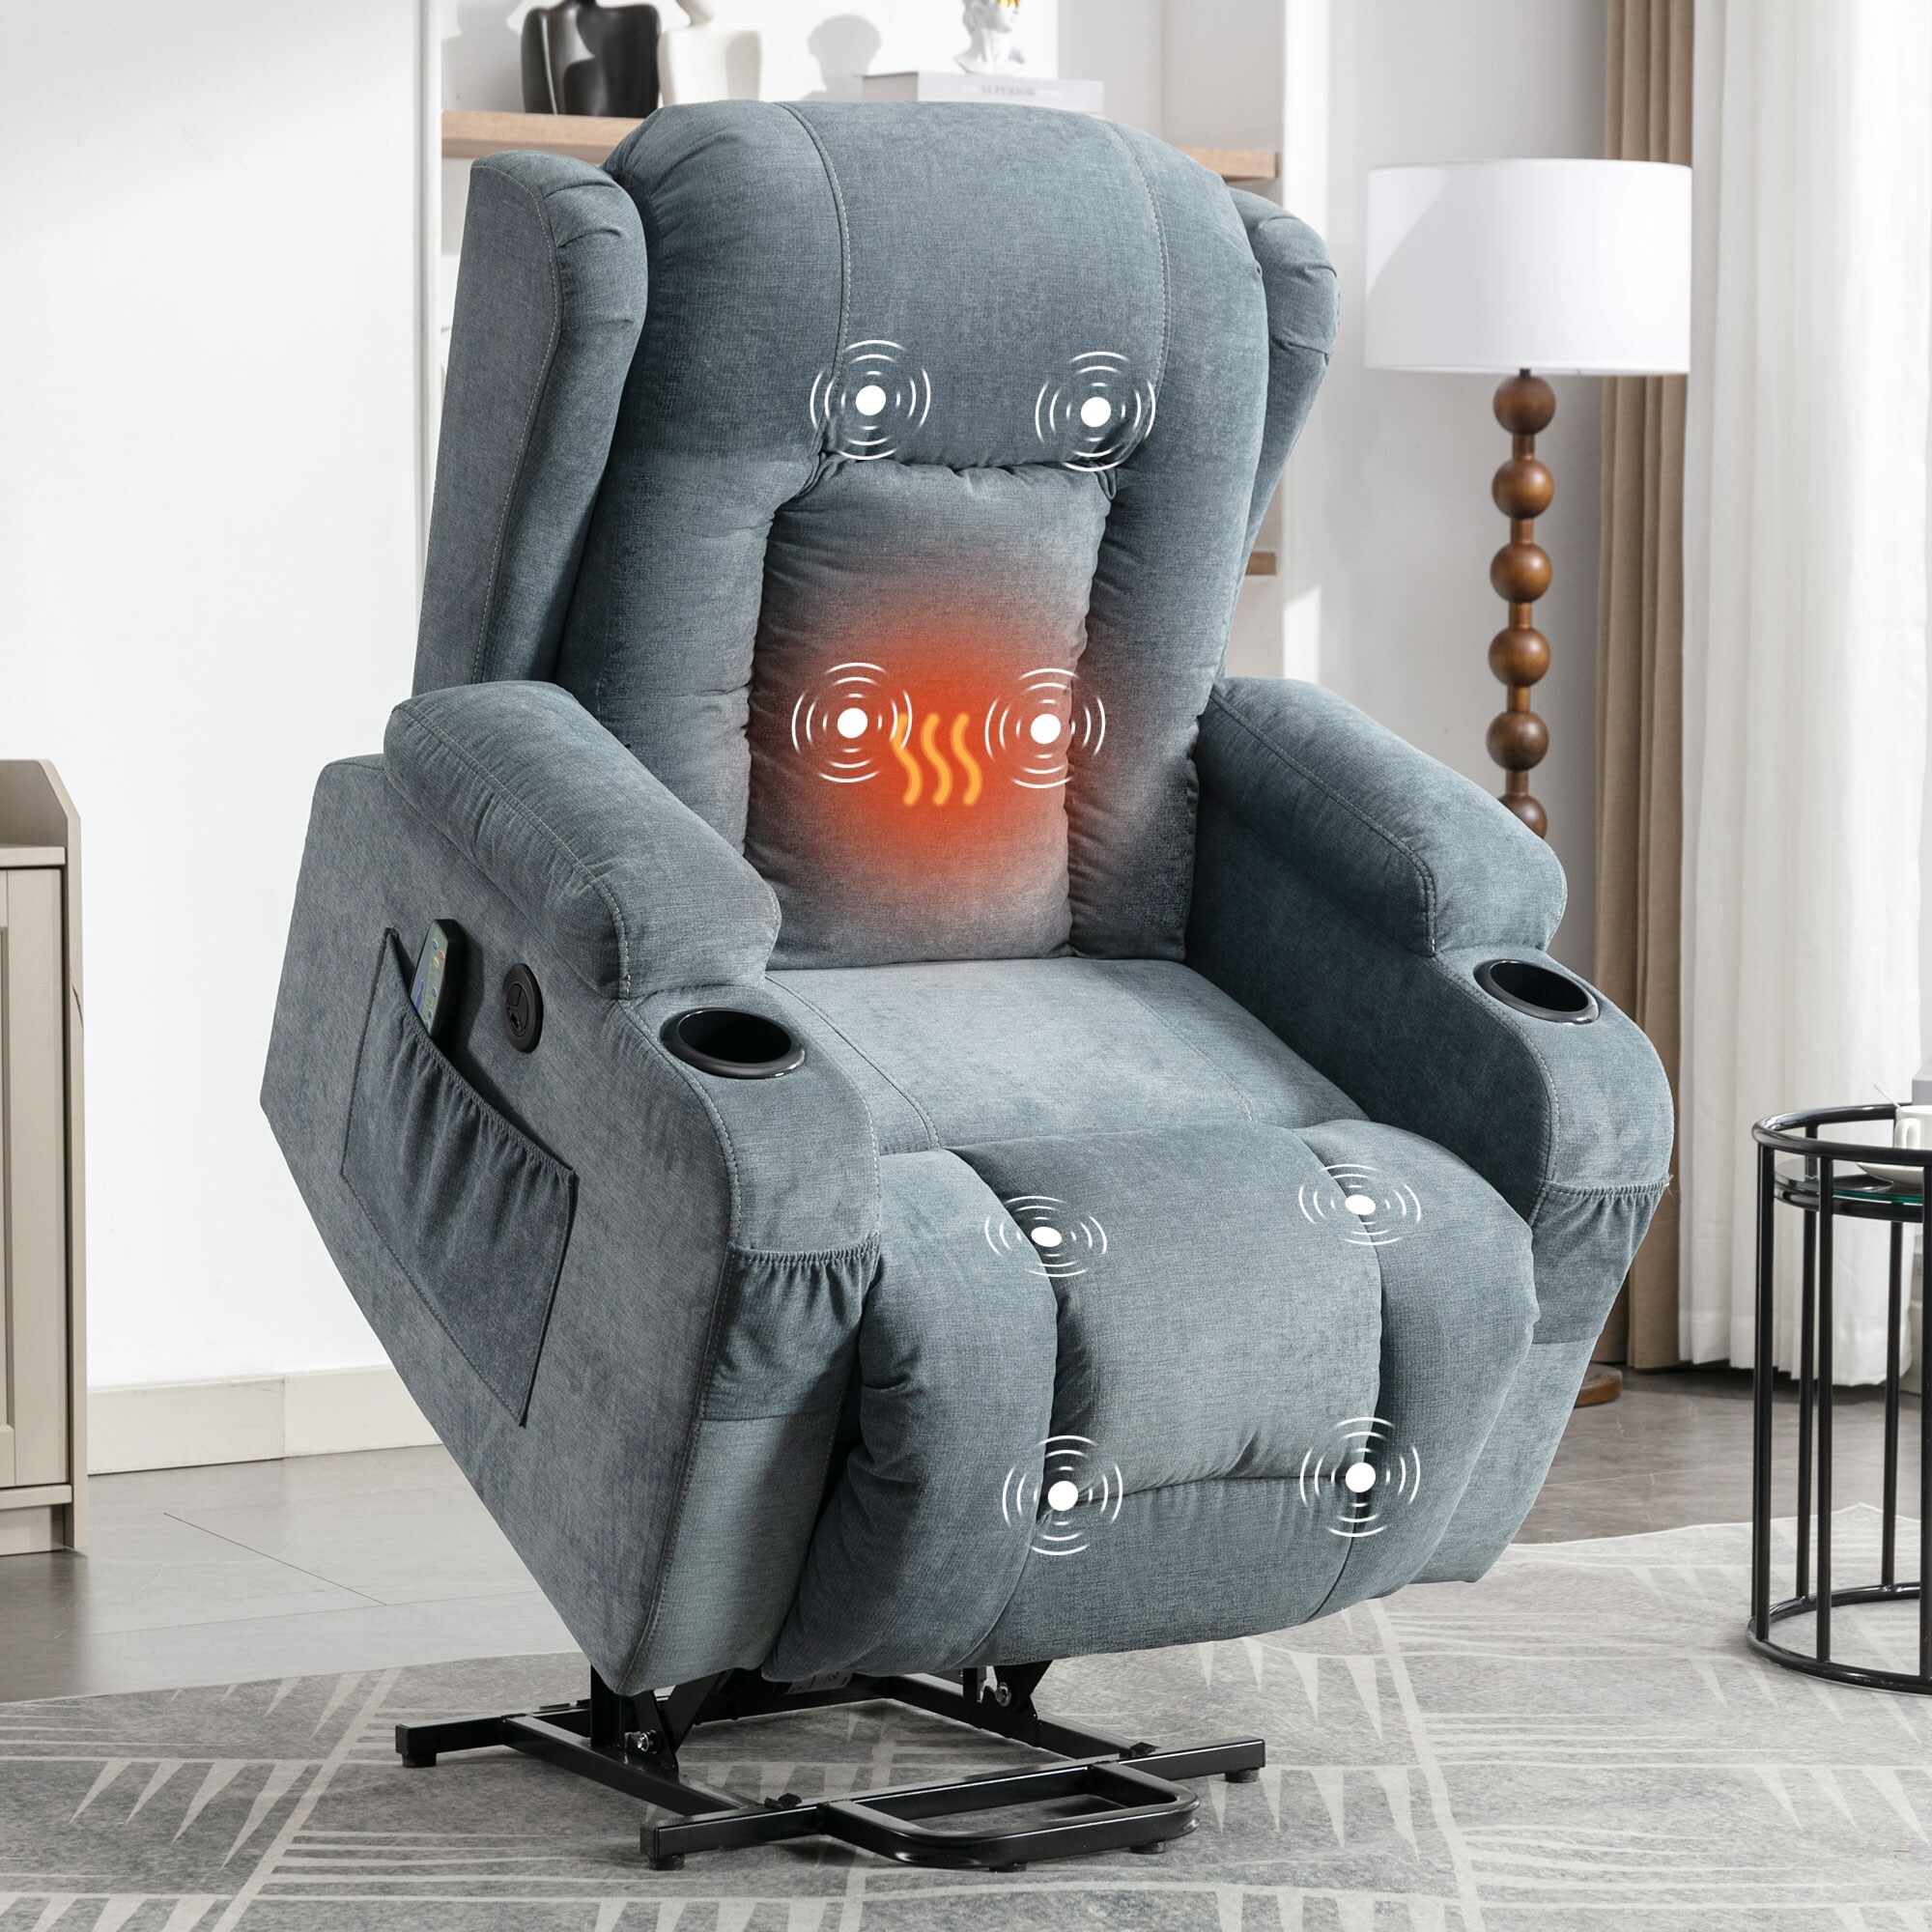 Upholstered Recliner Chairs - Bed Bath & Beyond